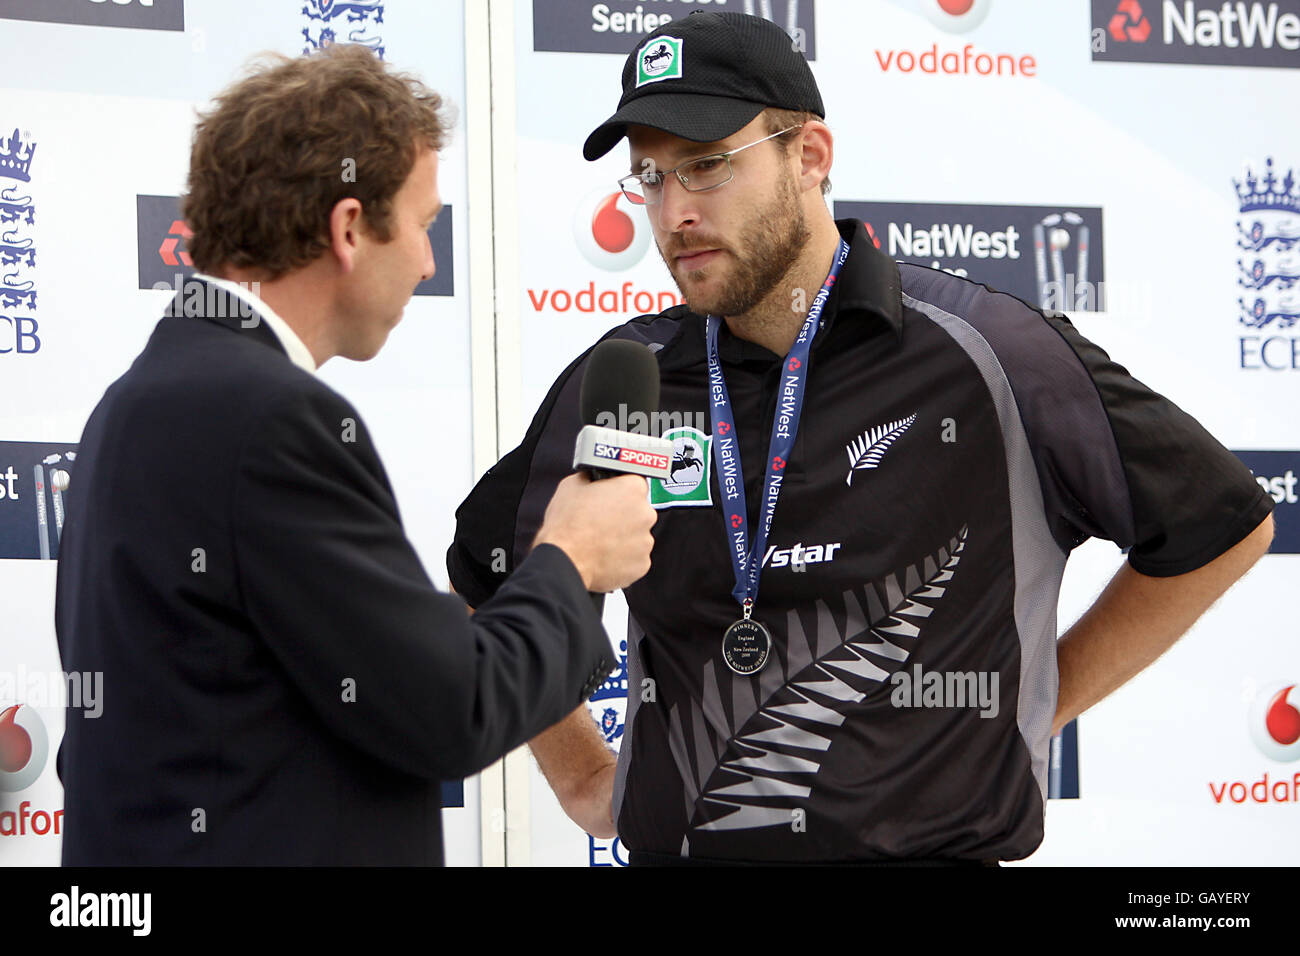 Cricket - NatWest Series - Fifth One Day International - England v New Zealand - Lord's. Tv Presenter and Former England Cricketer Michael Atherton (l) interviews New Zealand Captain Daniel Vettori Stock Photo